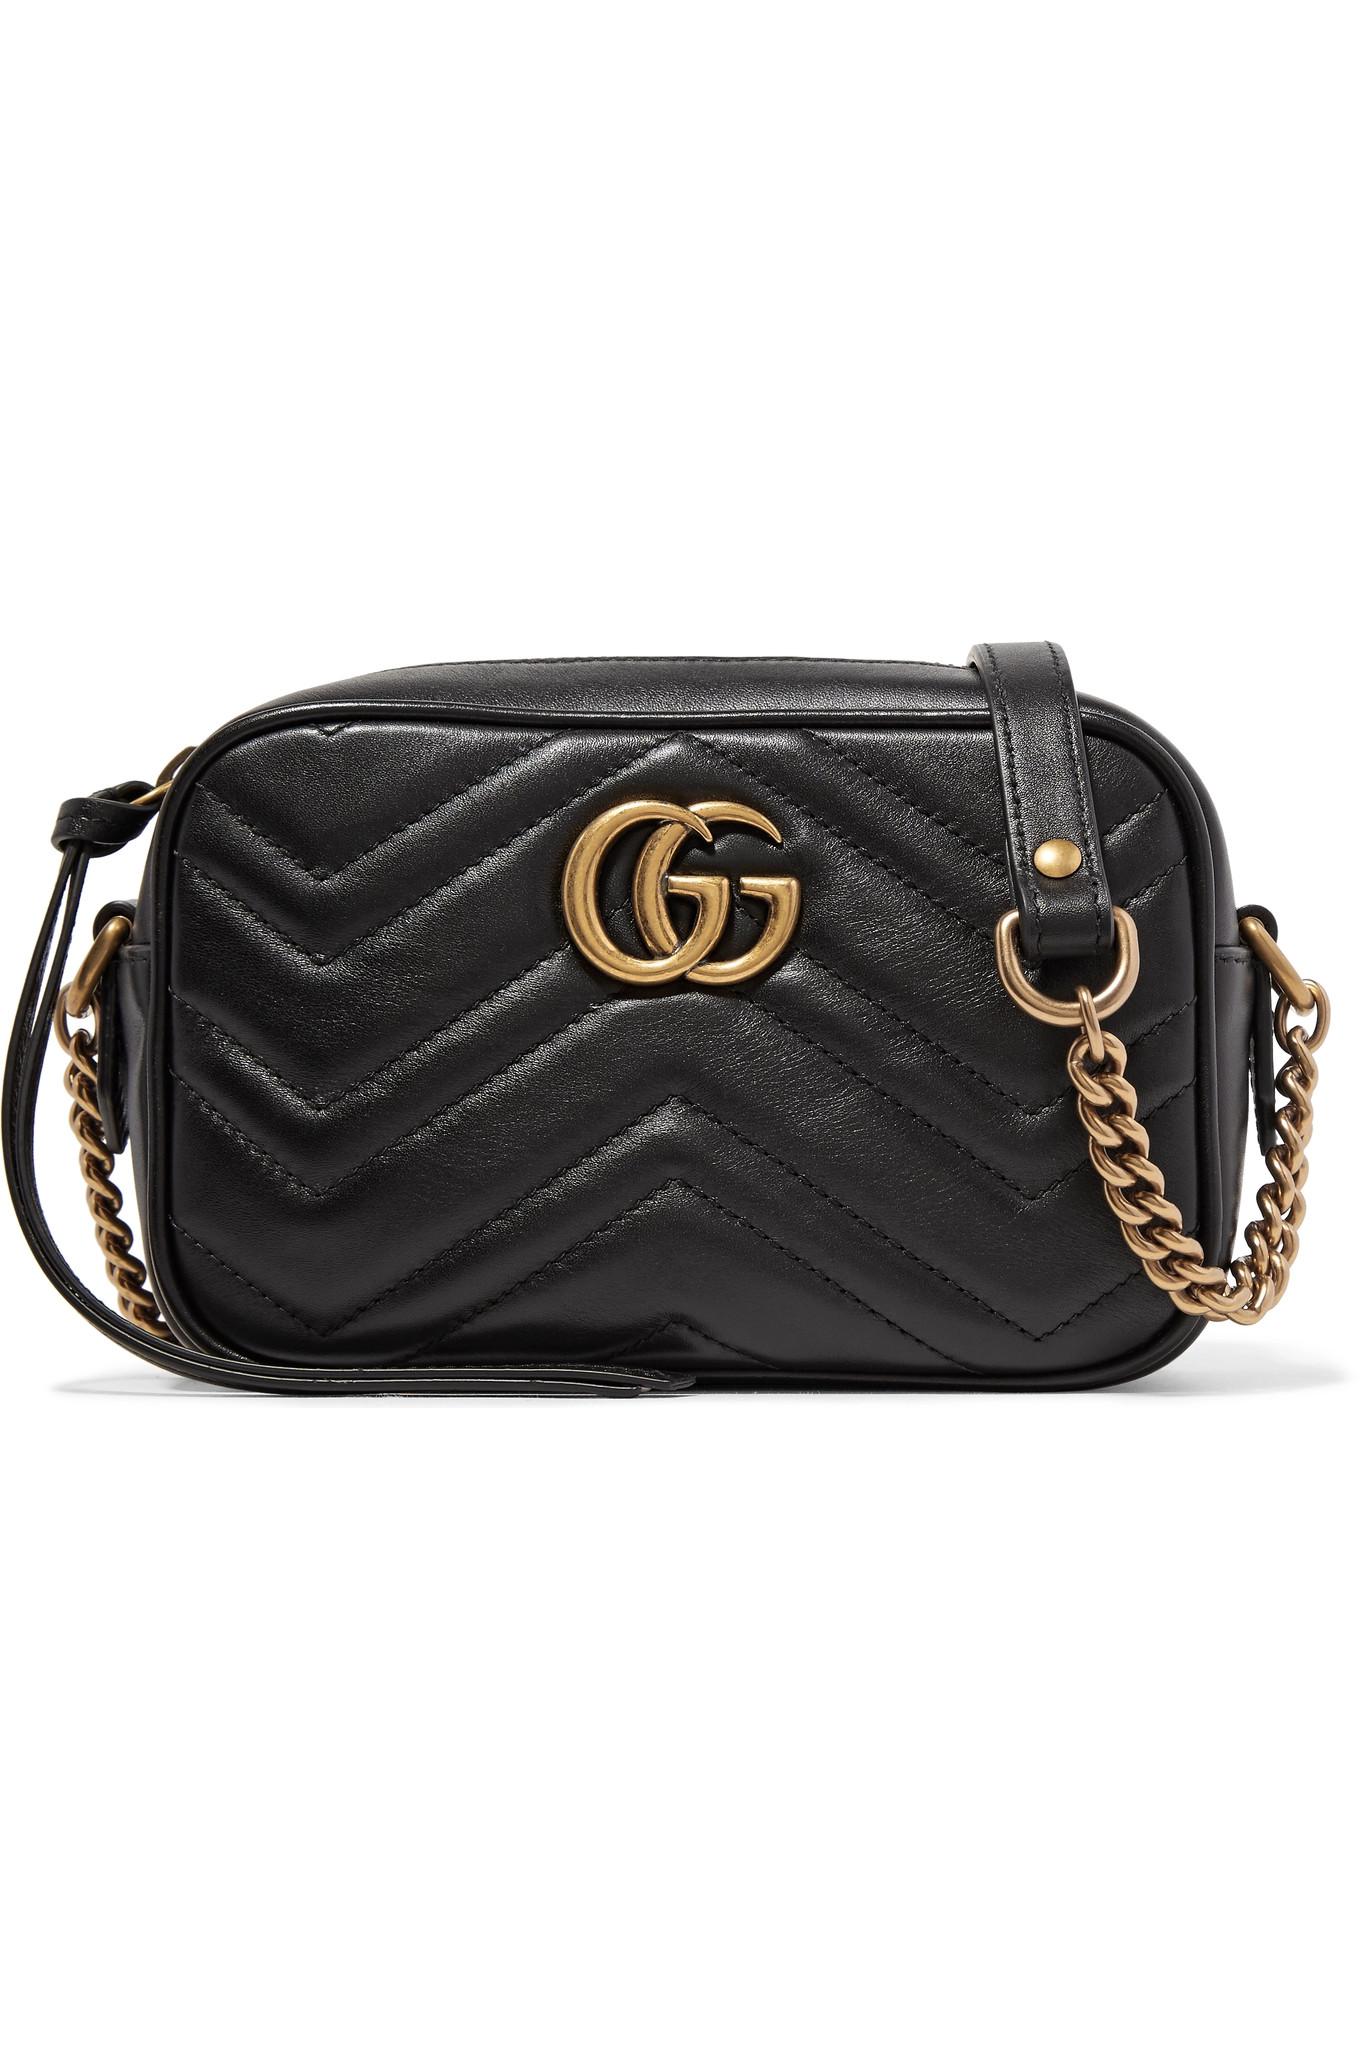 Gucci Gg Marmont Camera Mini Quilted Leather Shoulder Bag in Black - Lyst